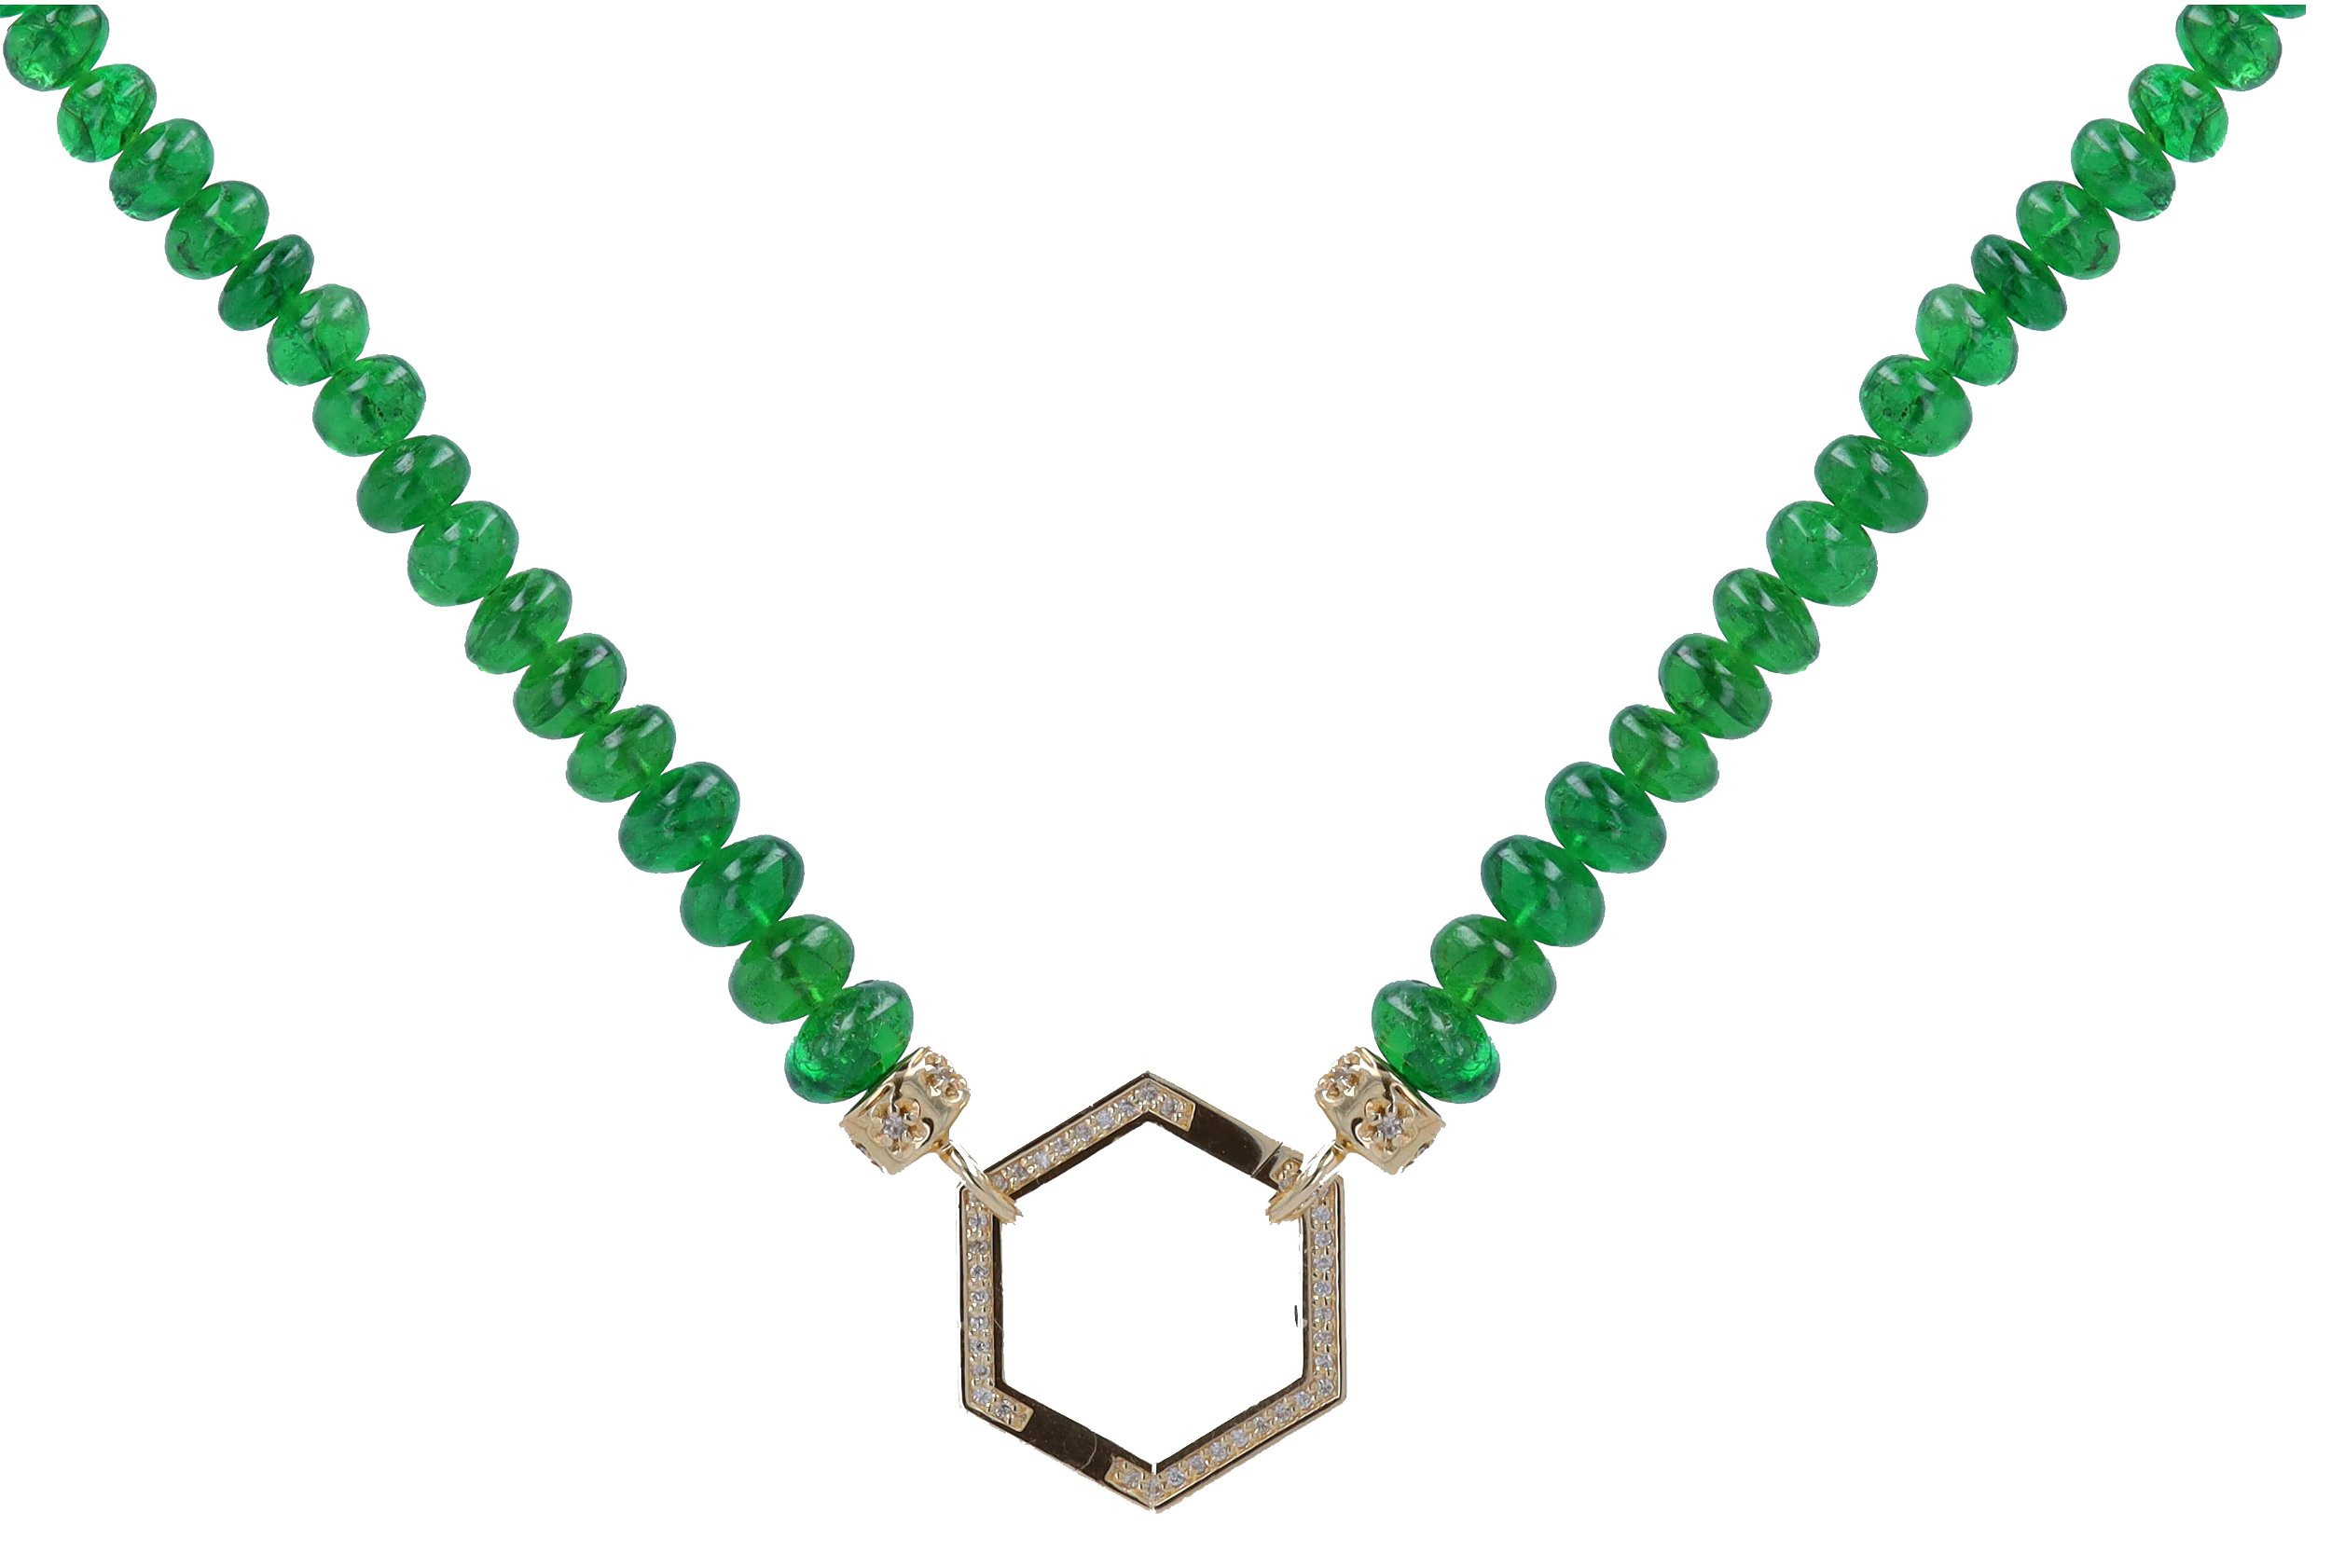 22" ~5mm Hand Polished Translucent Emerald Beaded Chain With 14k Gold Extension, and end Caps with Hexagon